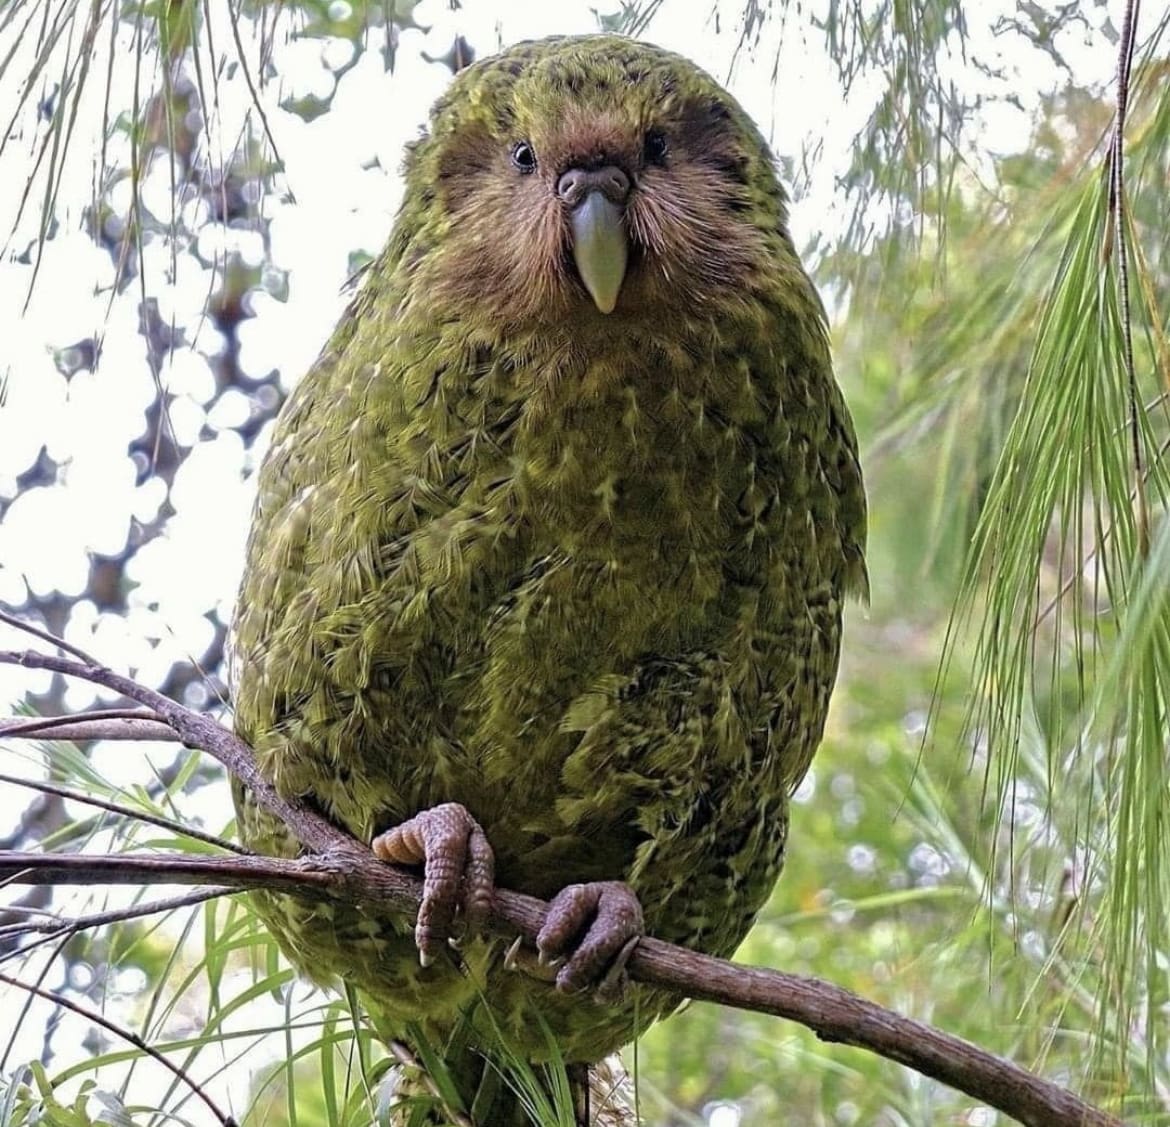 The Kakapo, or Owl Parrot, is the only non-flying member of it's species alive today